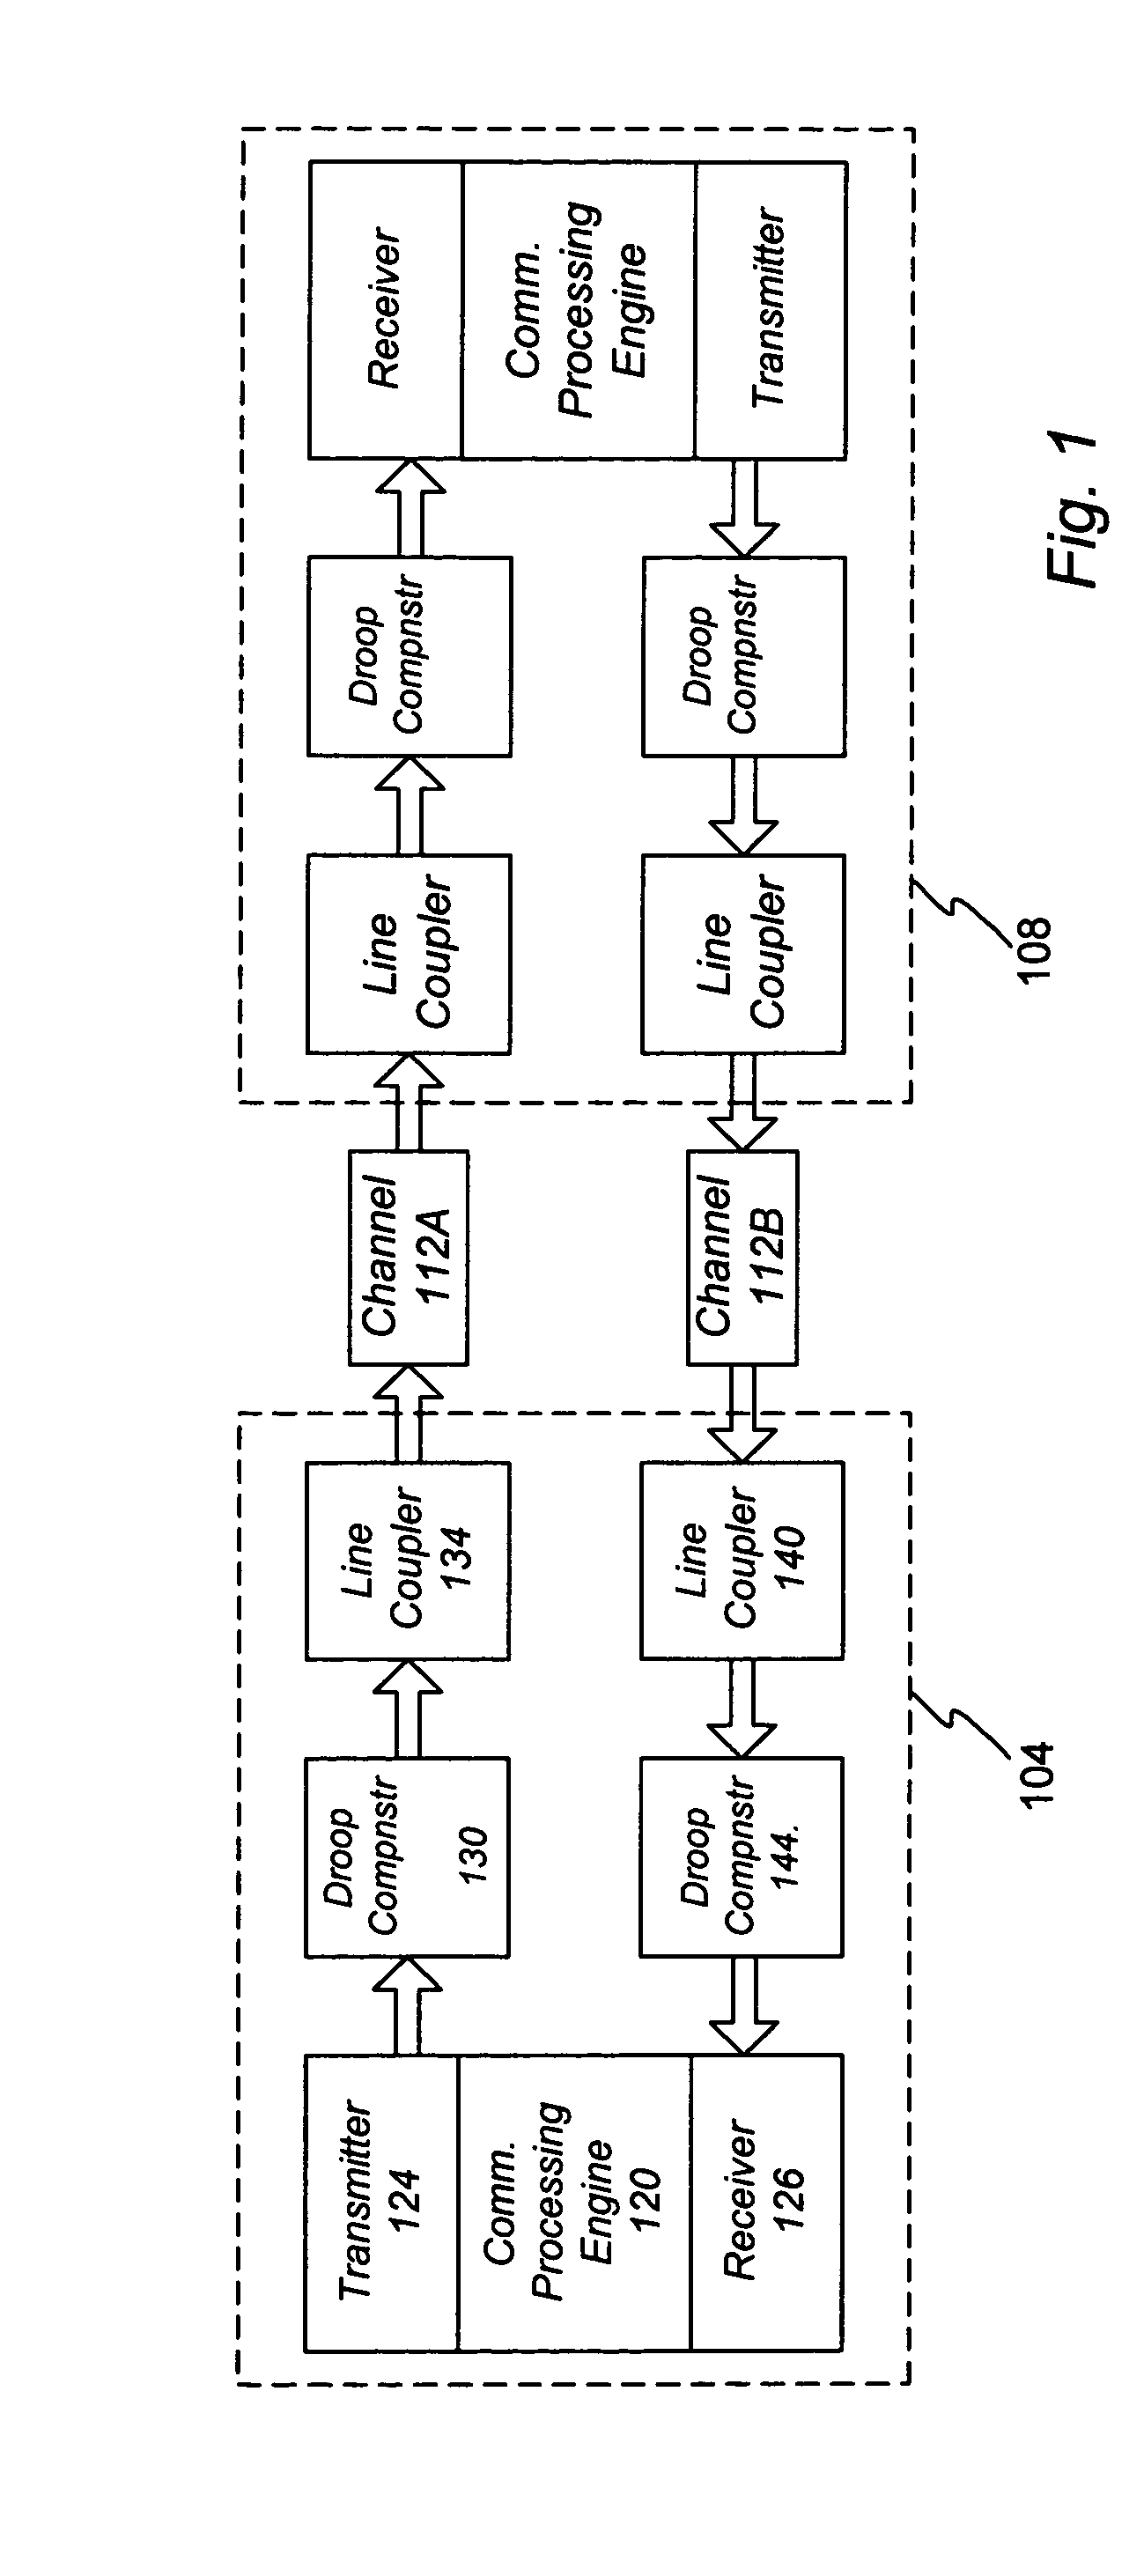 Method and apparatus for reducing transmitter AC-coupling droop